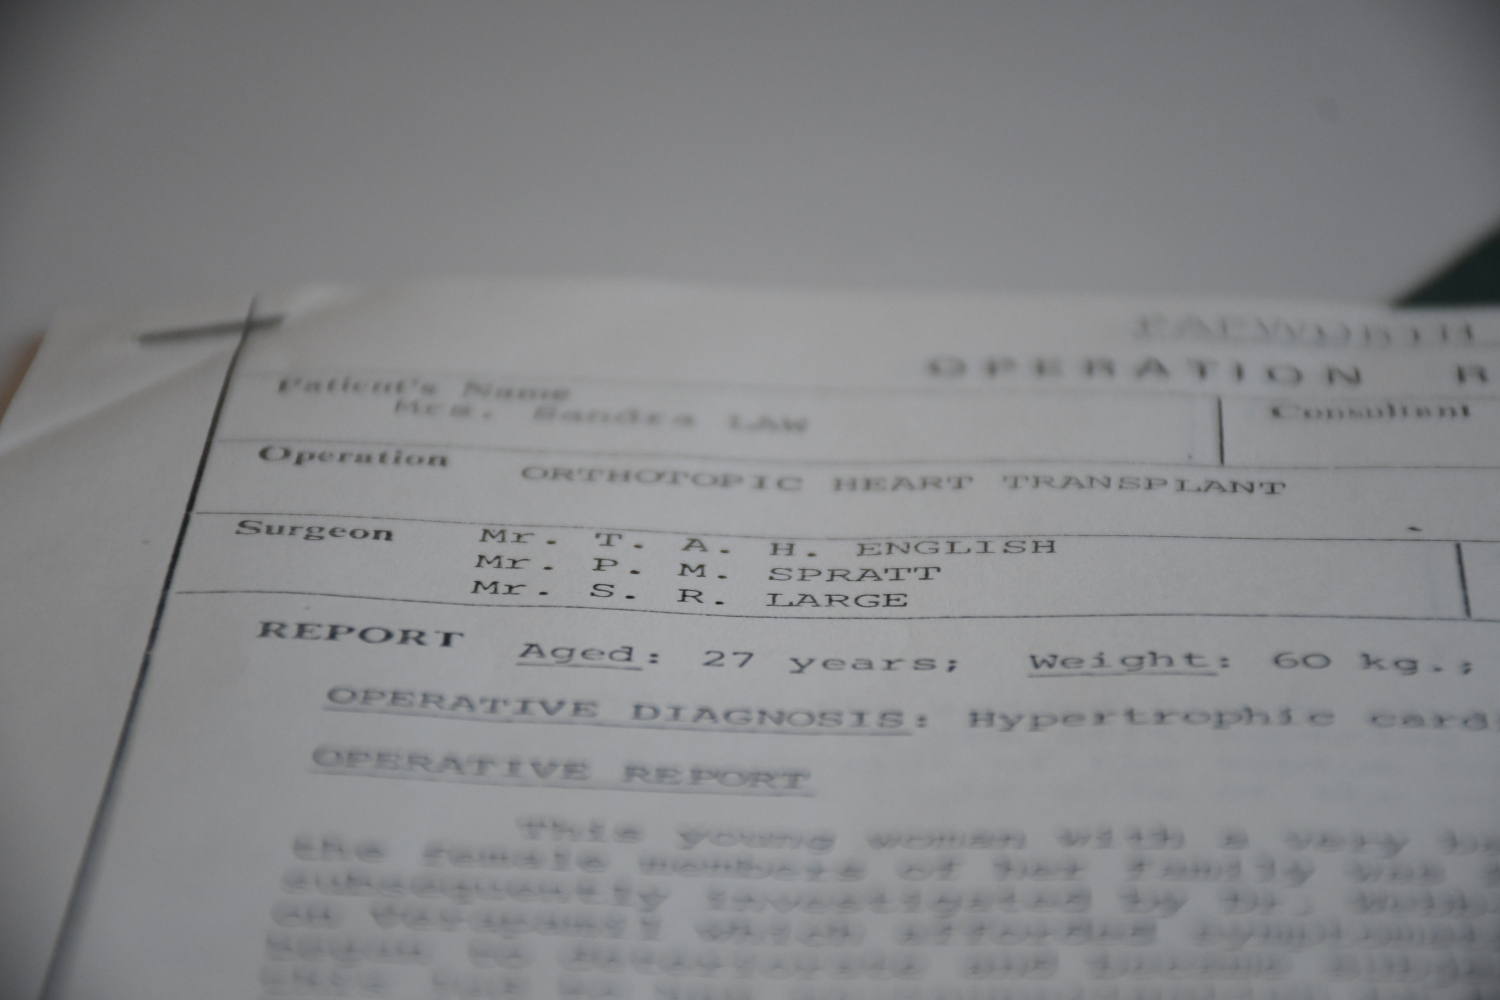 An old piece of paper saying 'Operation Report Form' with typewriter font notes.